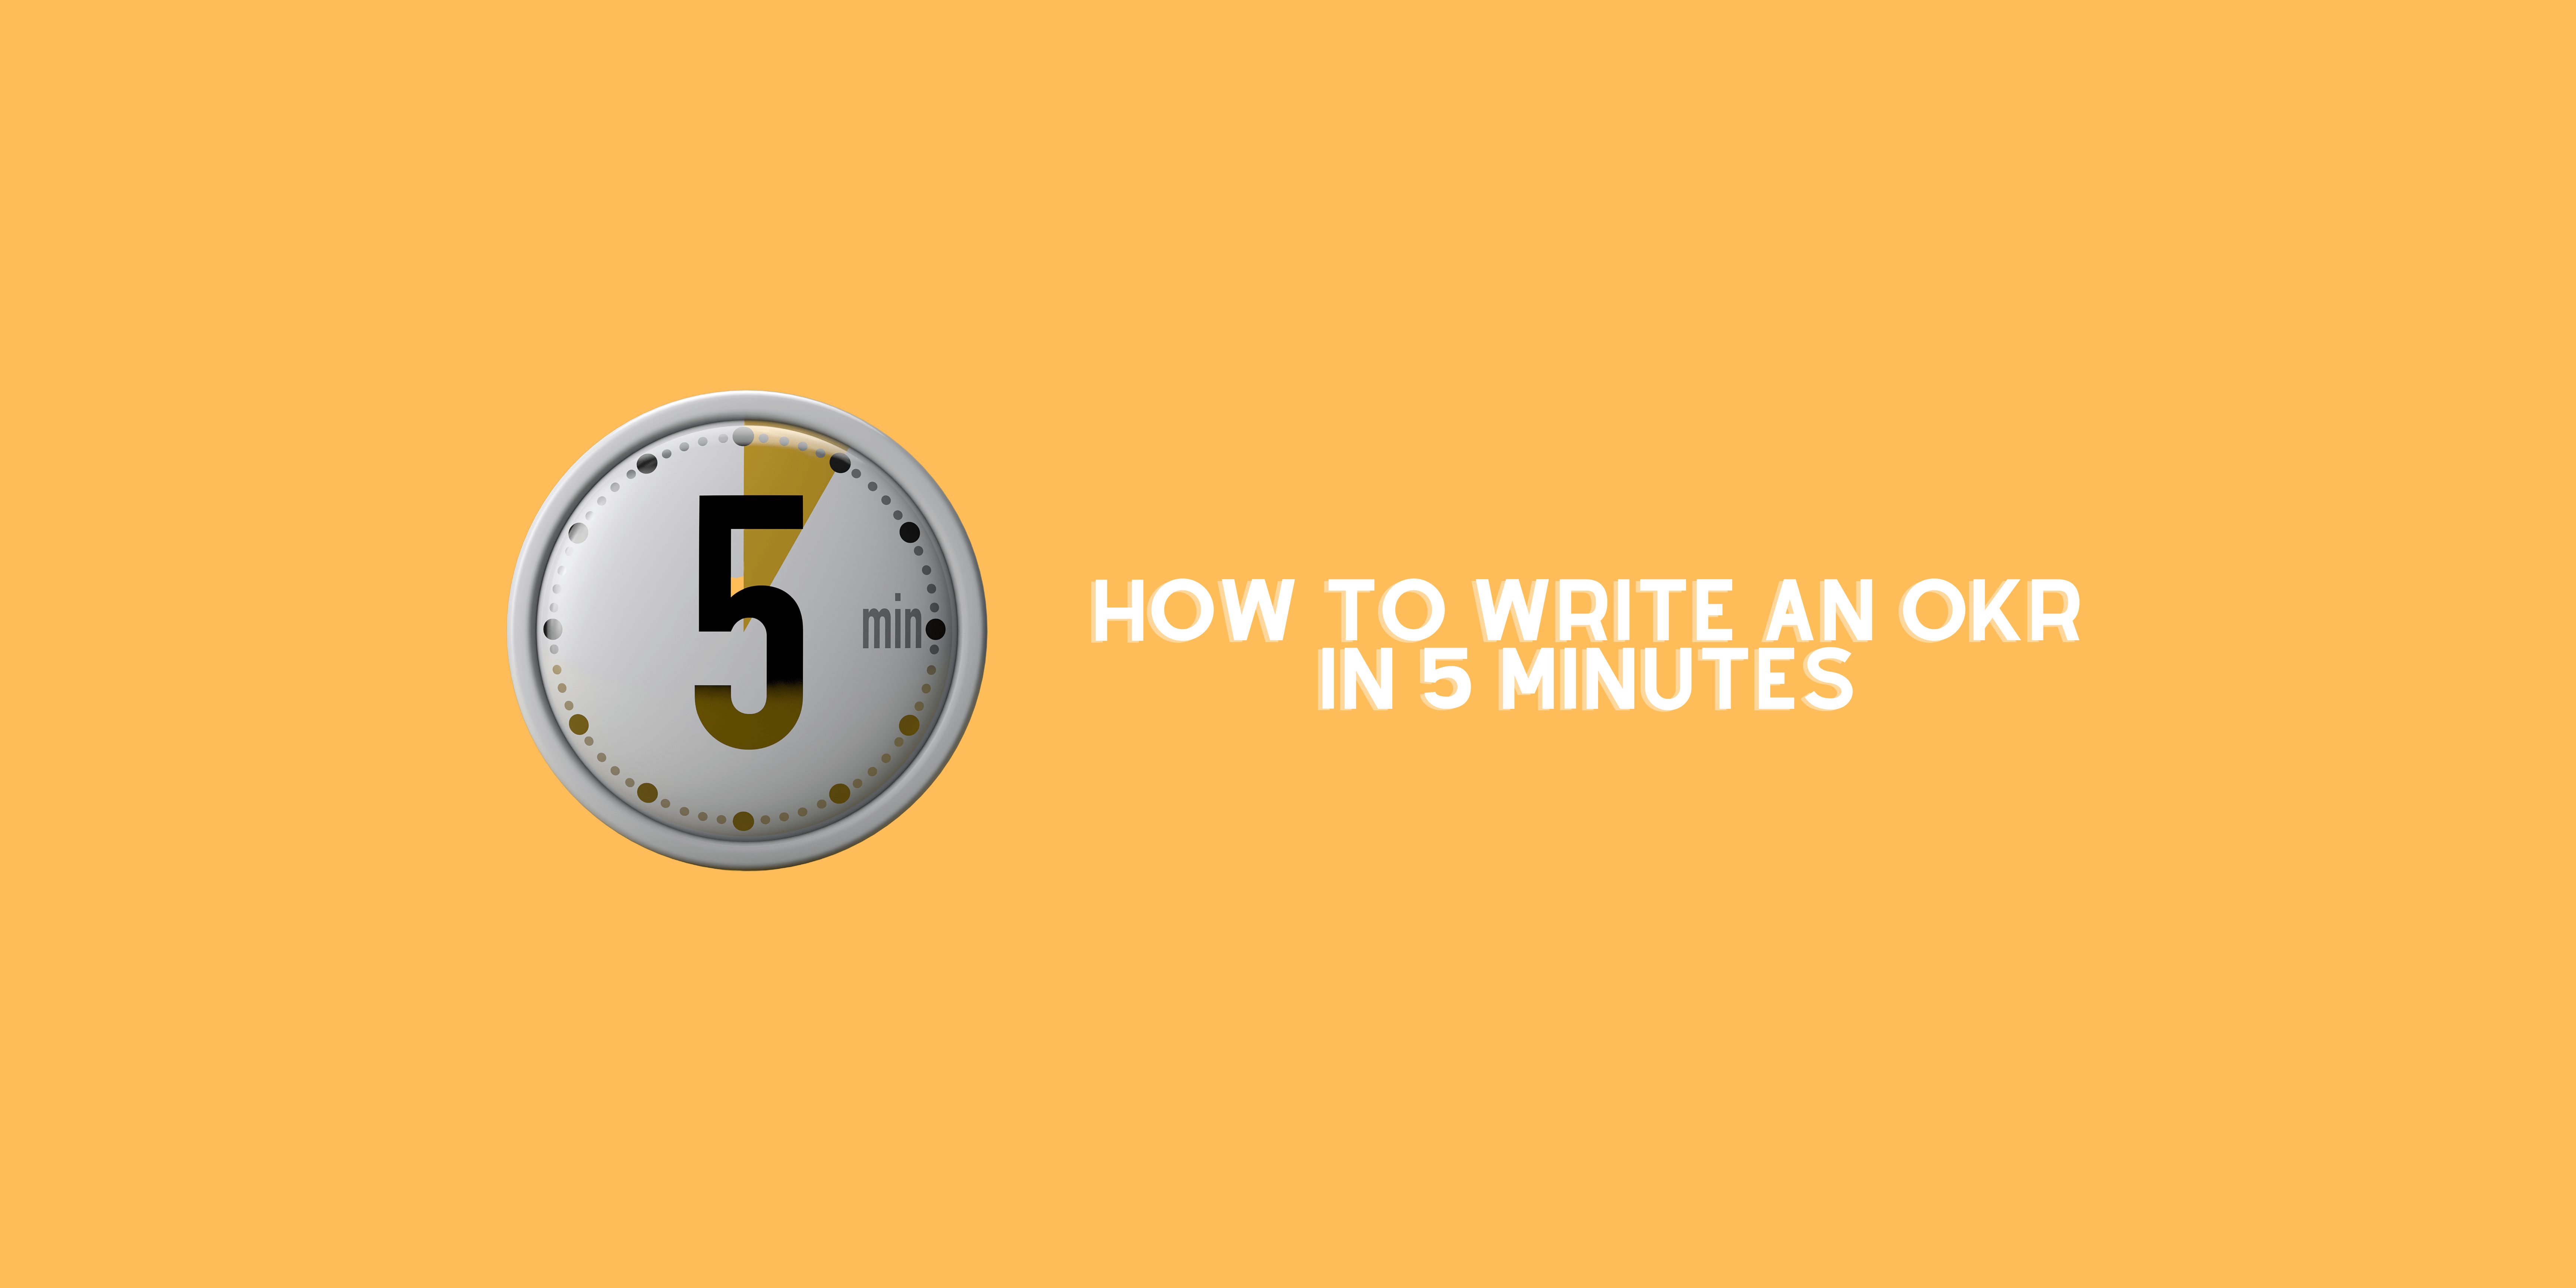 how to write an okr in 5 minutes (1)